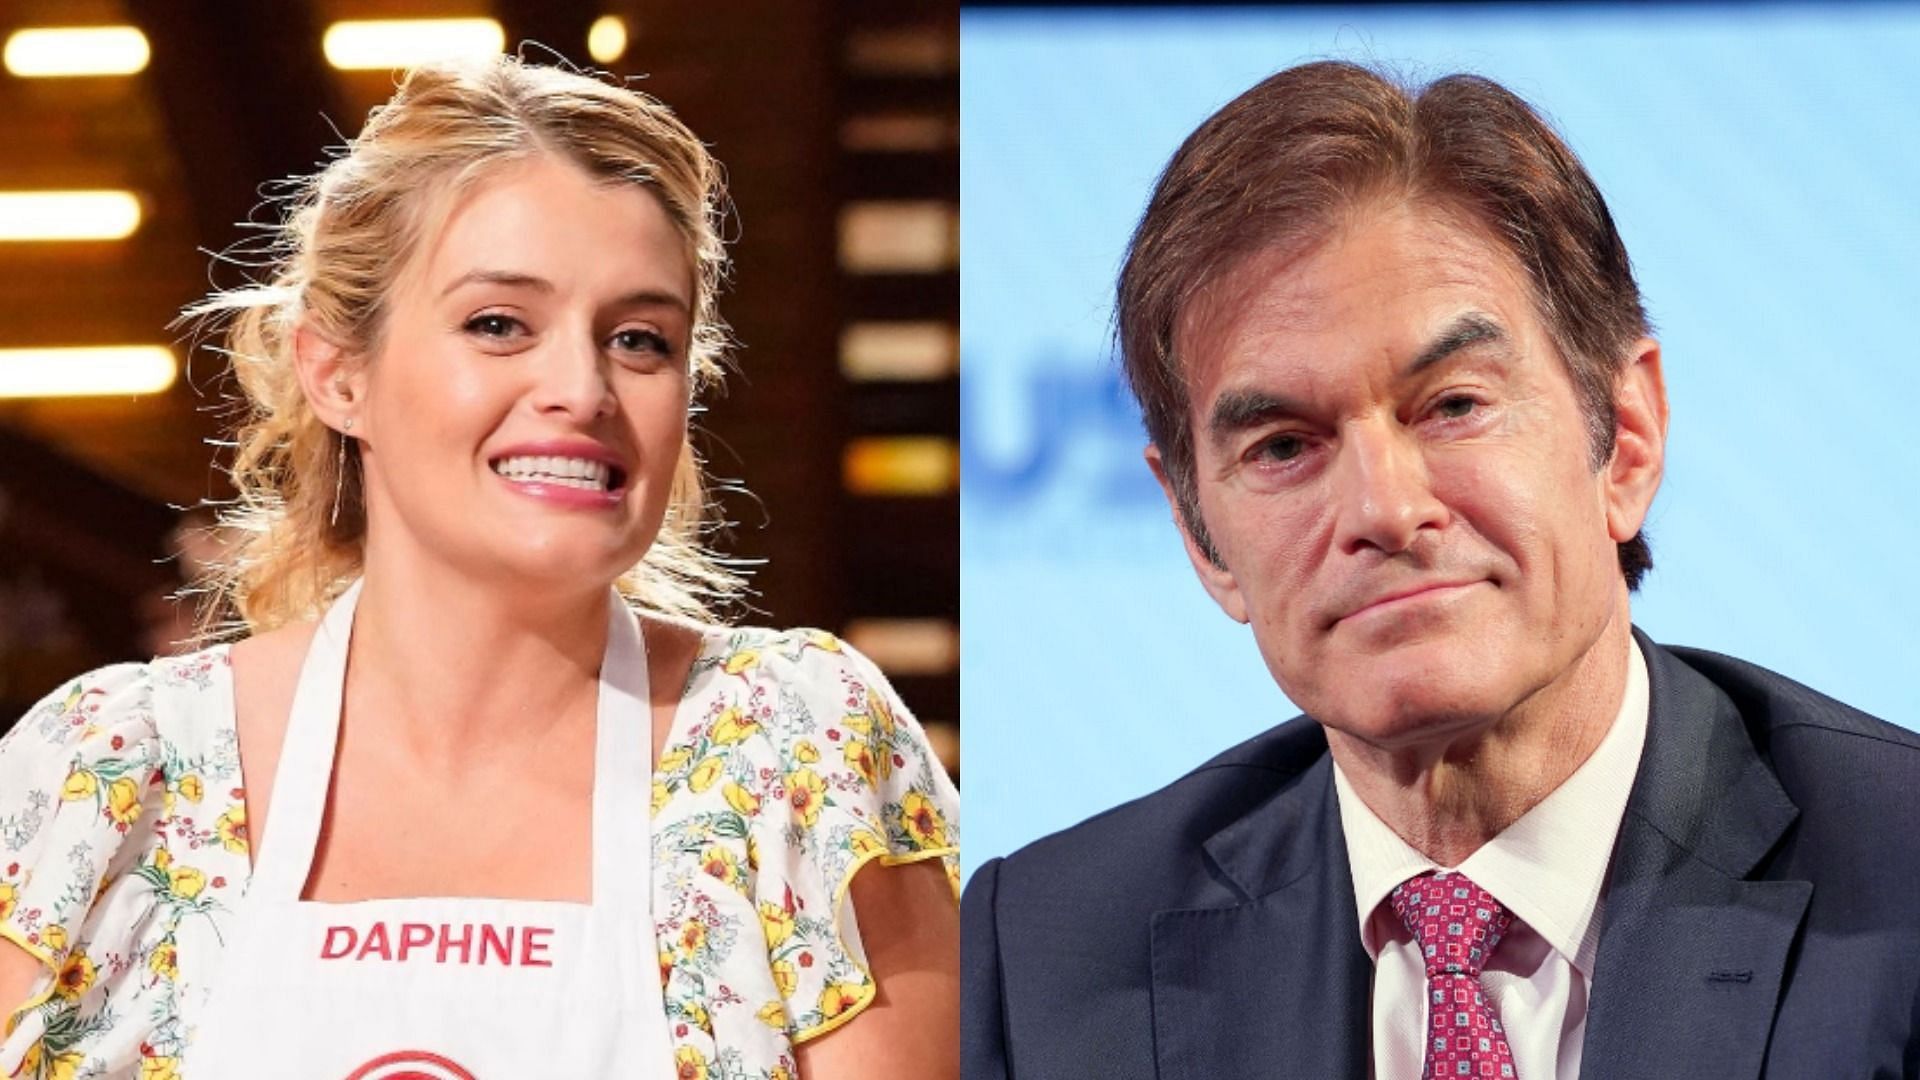 &#039;The Dr Oz Show&#039; is set to be replaced by Daphne Oz&#039;s &#039;The Good Dish&#039; (Image via Masterchef/FOX/Getty Images and Leigh Vogel/GettyImages)